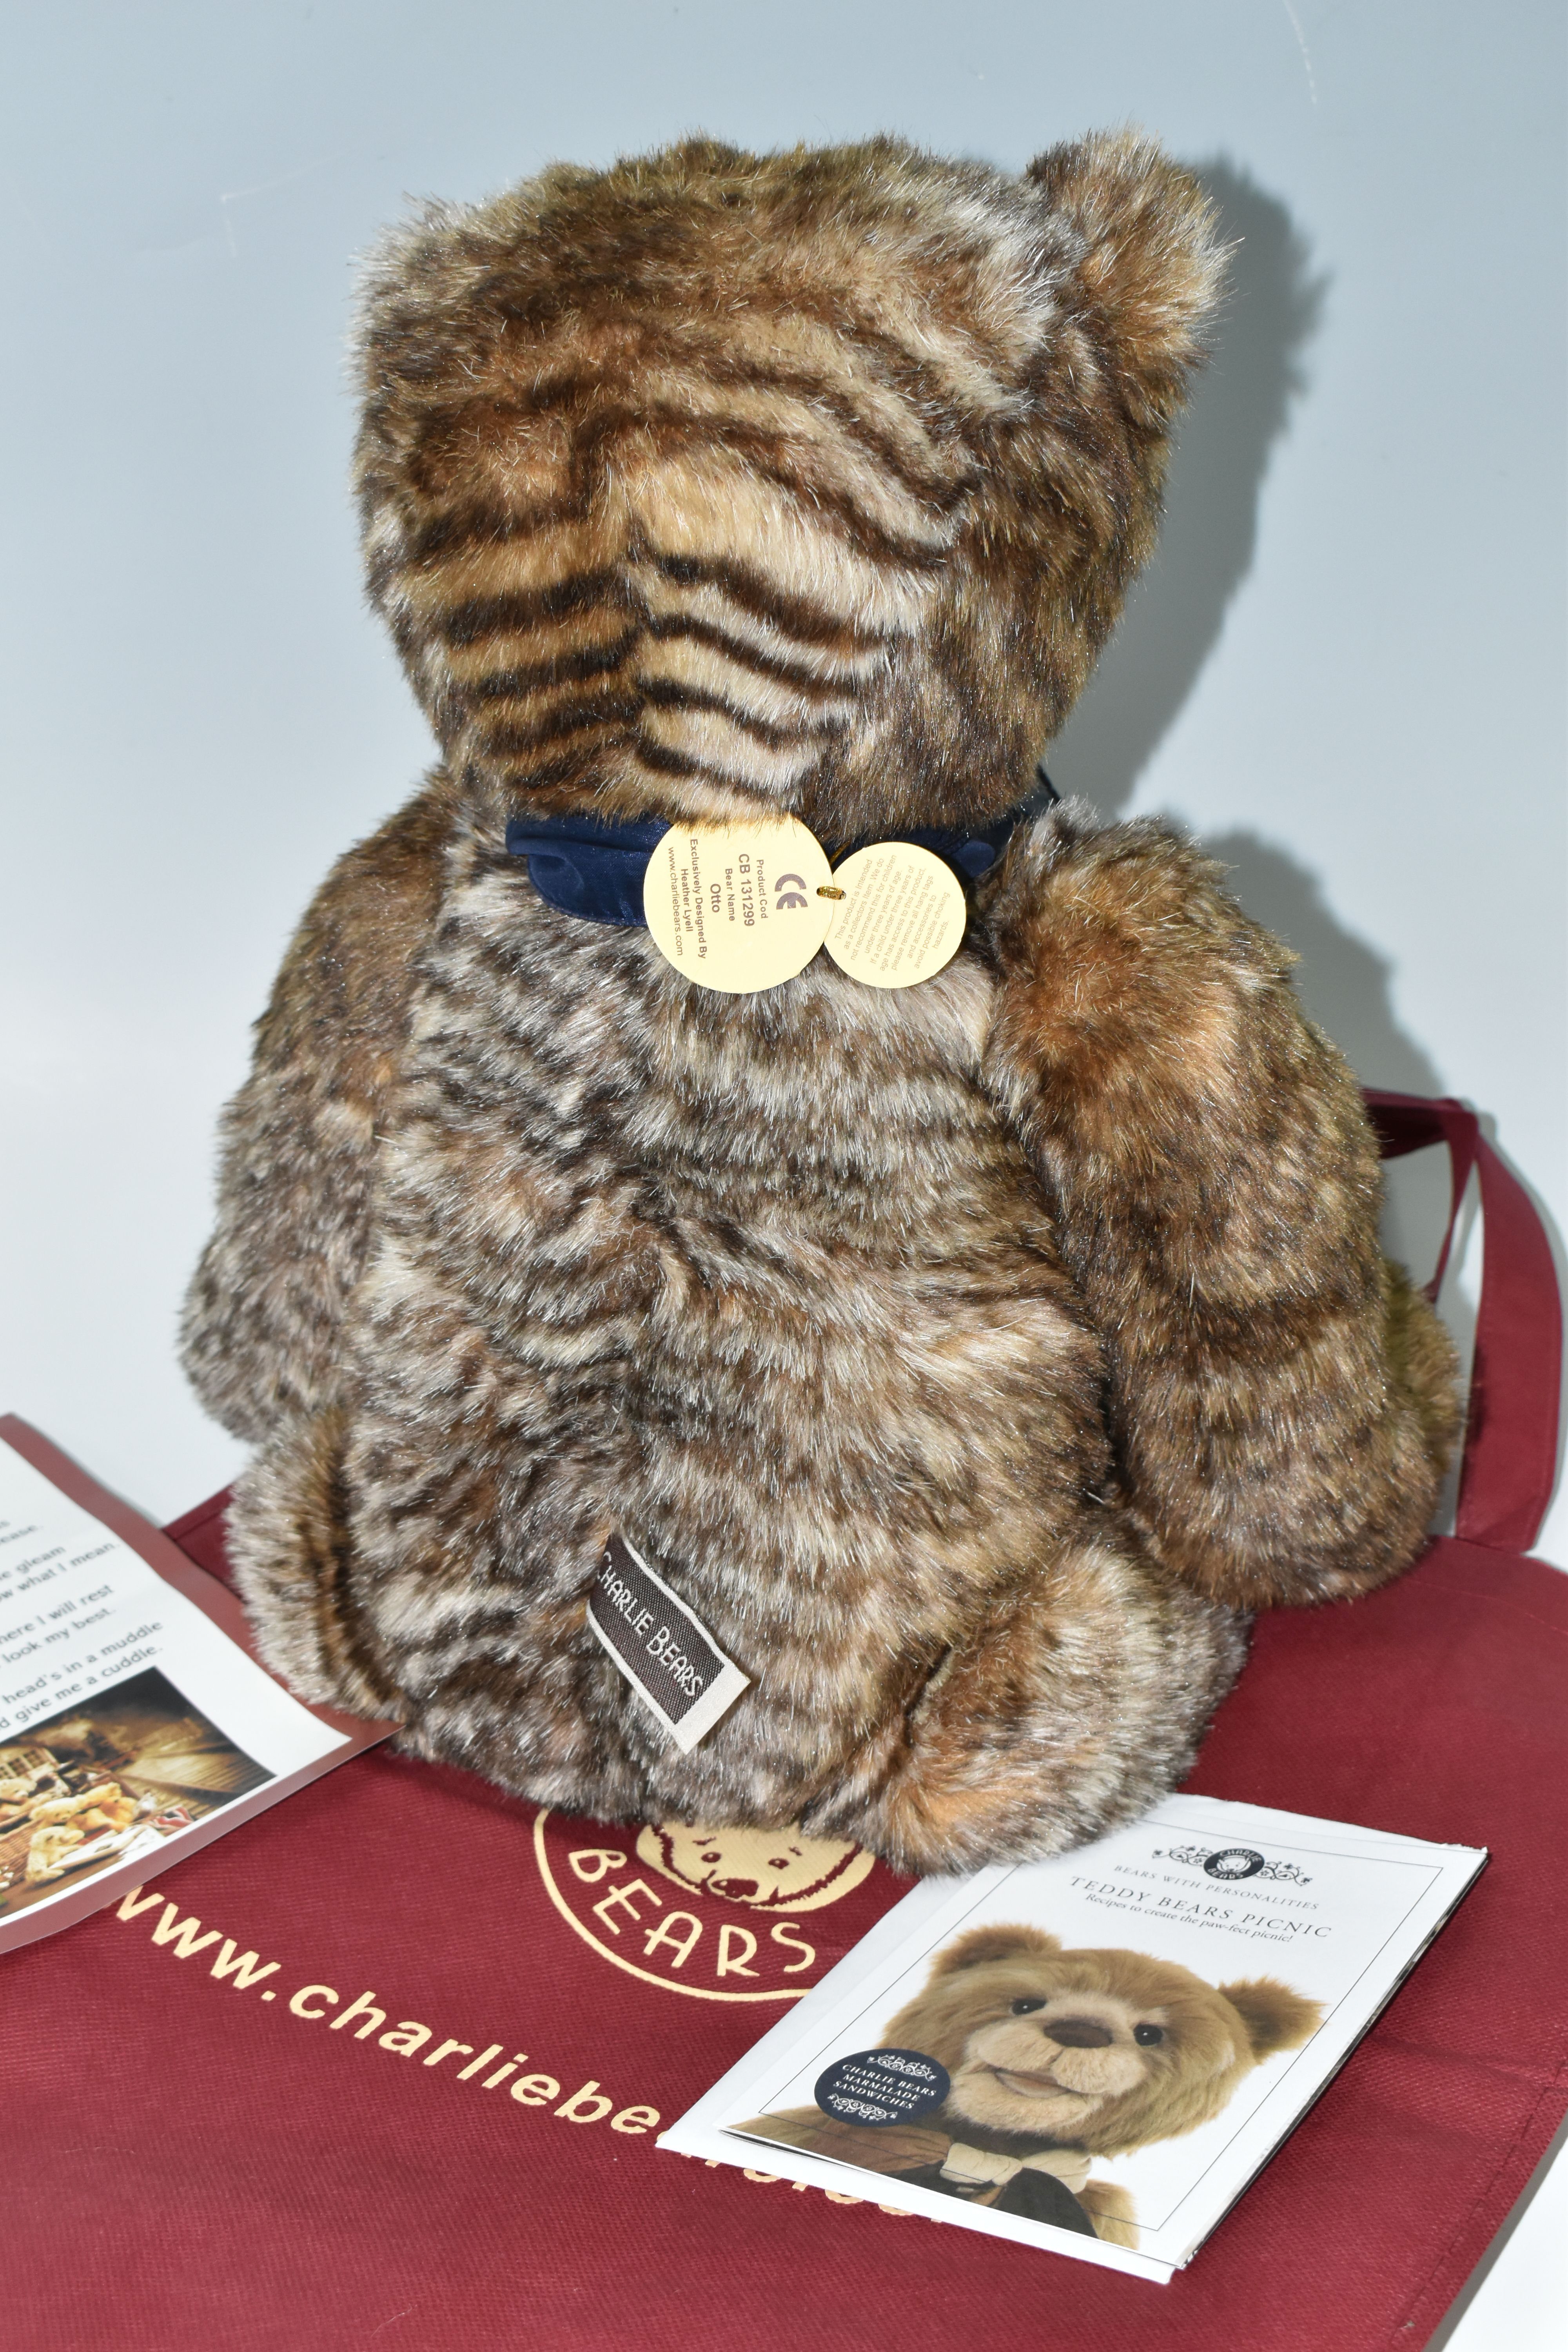 A CHARLIE BEARS 'OTTO' TEDDY BEAR, no CB131299, designed by Heather Lyell, height approximately - Image 3 of 3